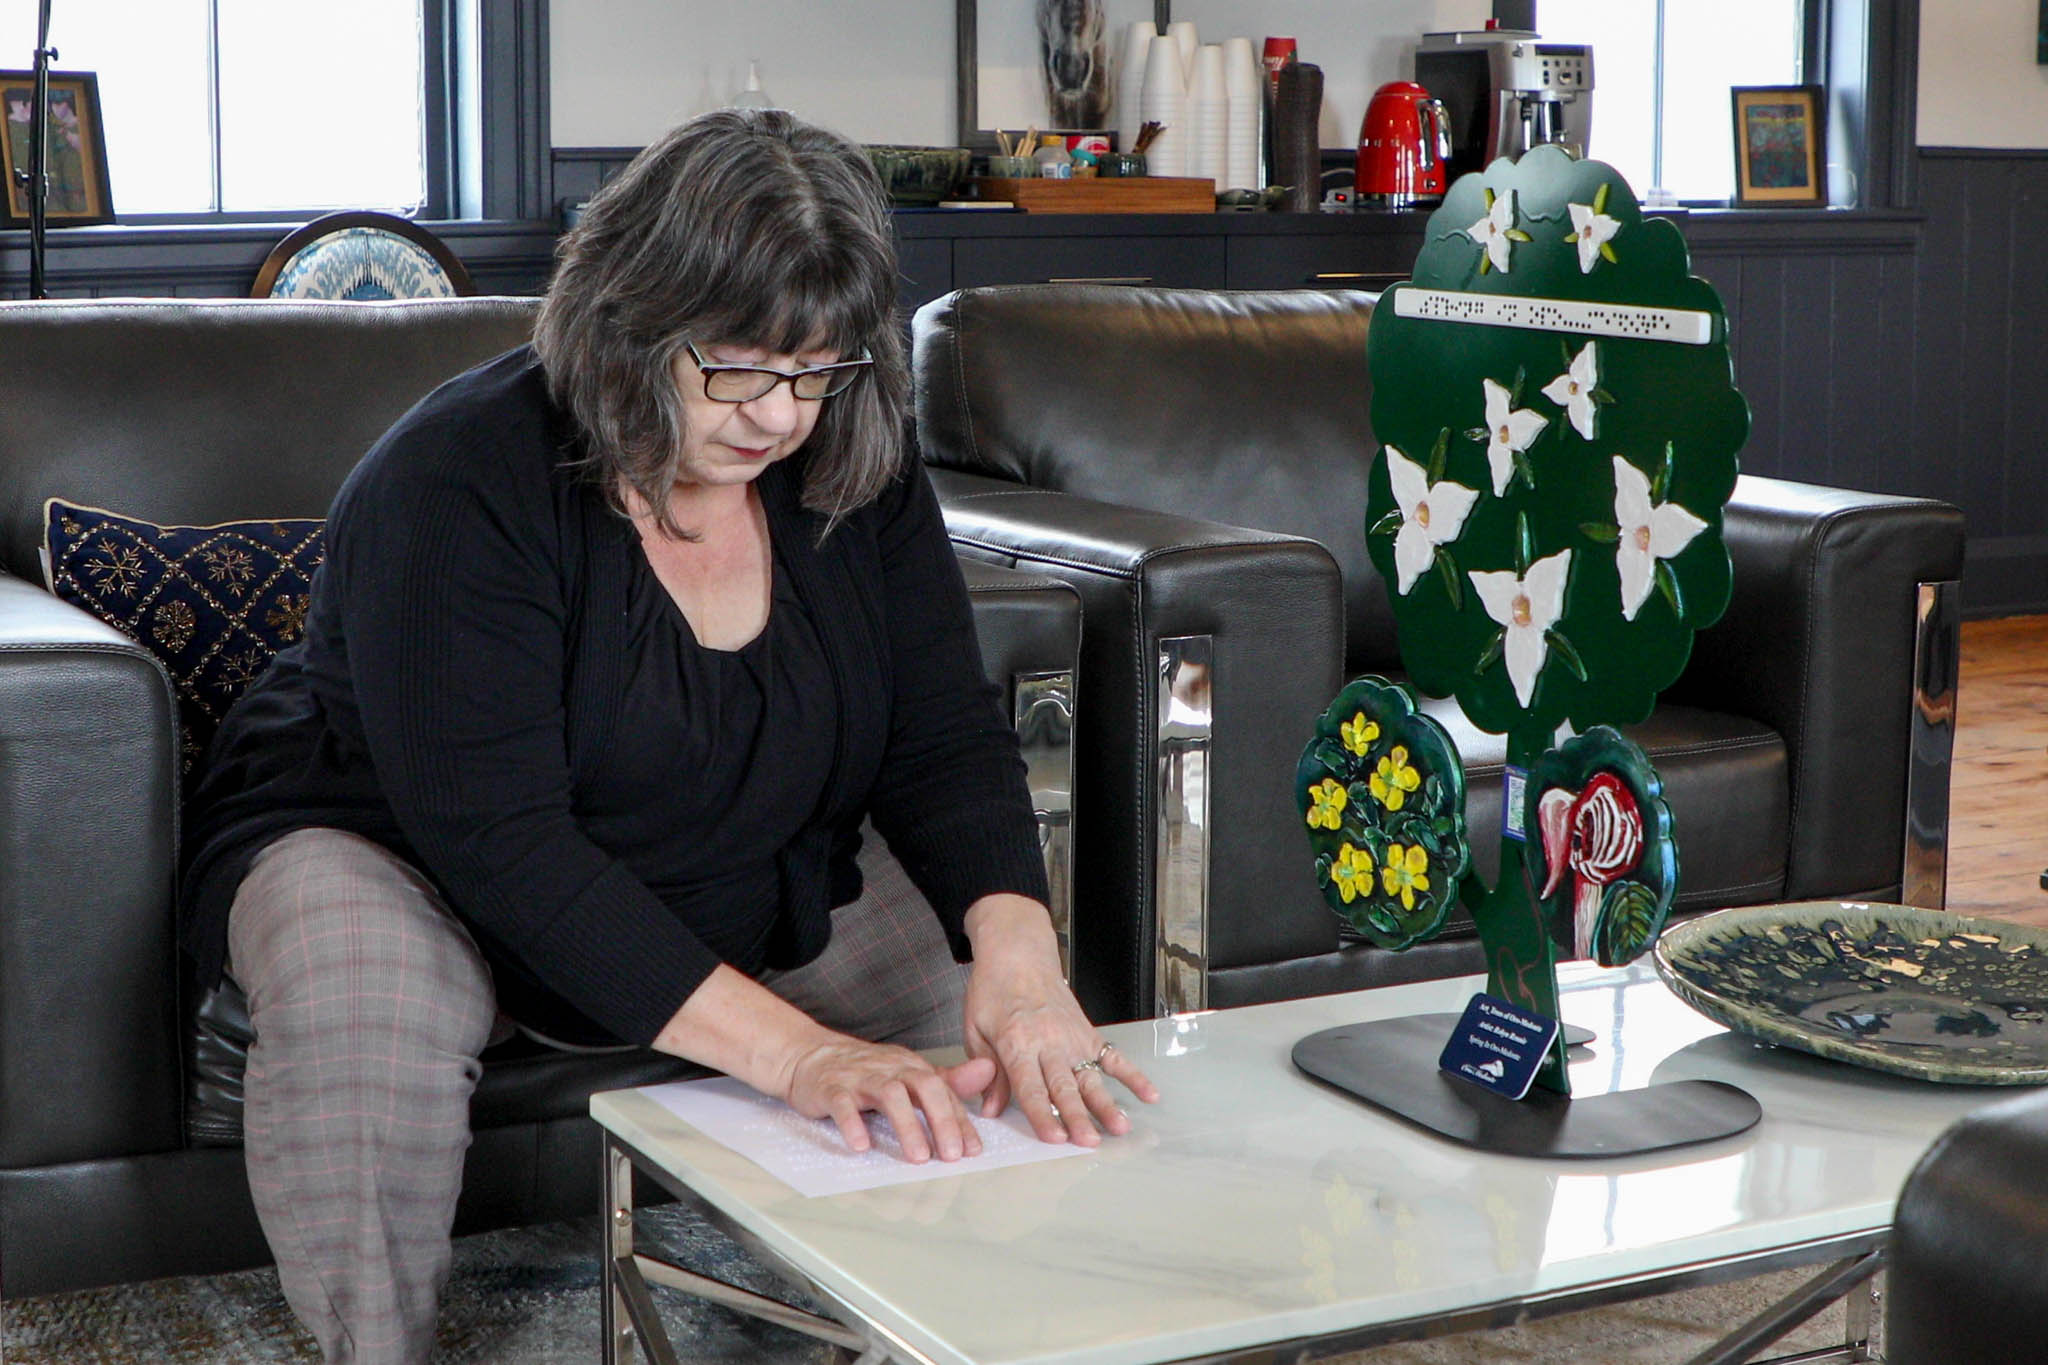 A woman with dark hair and glasses in a black top and grey pants reads a braille description of a sculpture on the table in front of her.